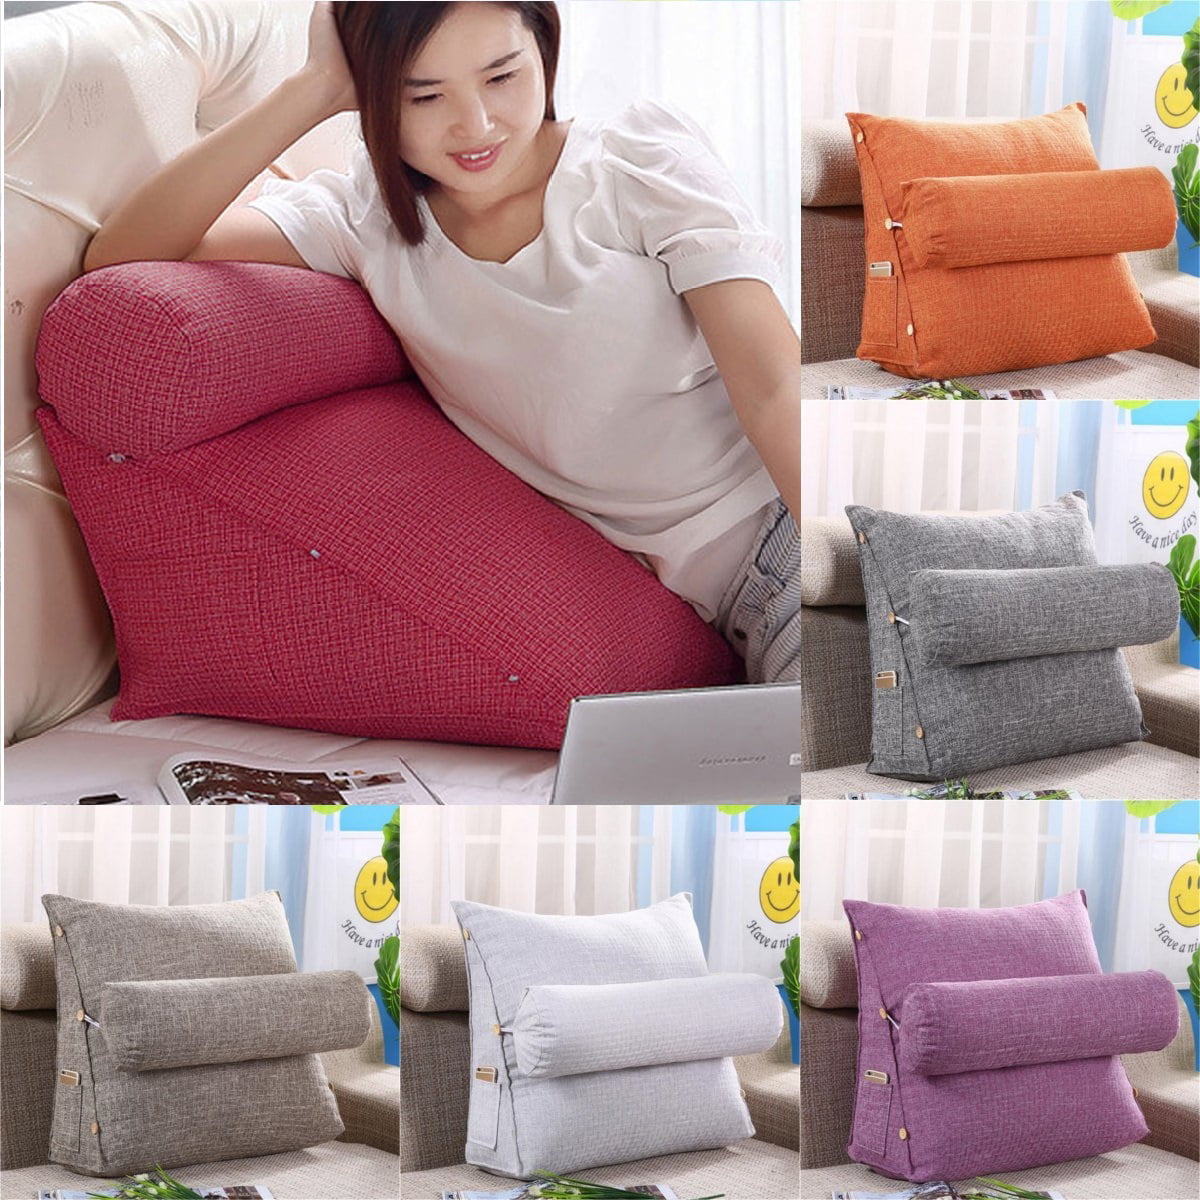 Large Adjustable Back Wedge Cushion Pillow 24x20x8inch Sofa Bed Office Chair Rest Cushion Neck